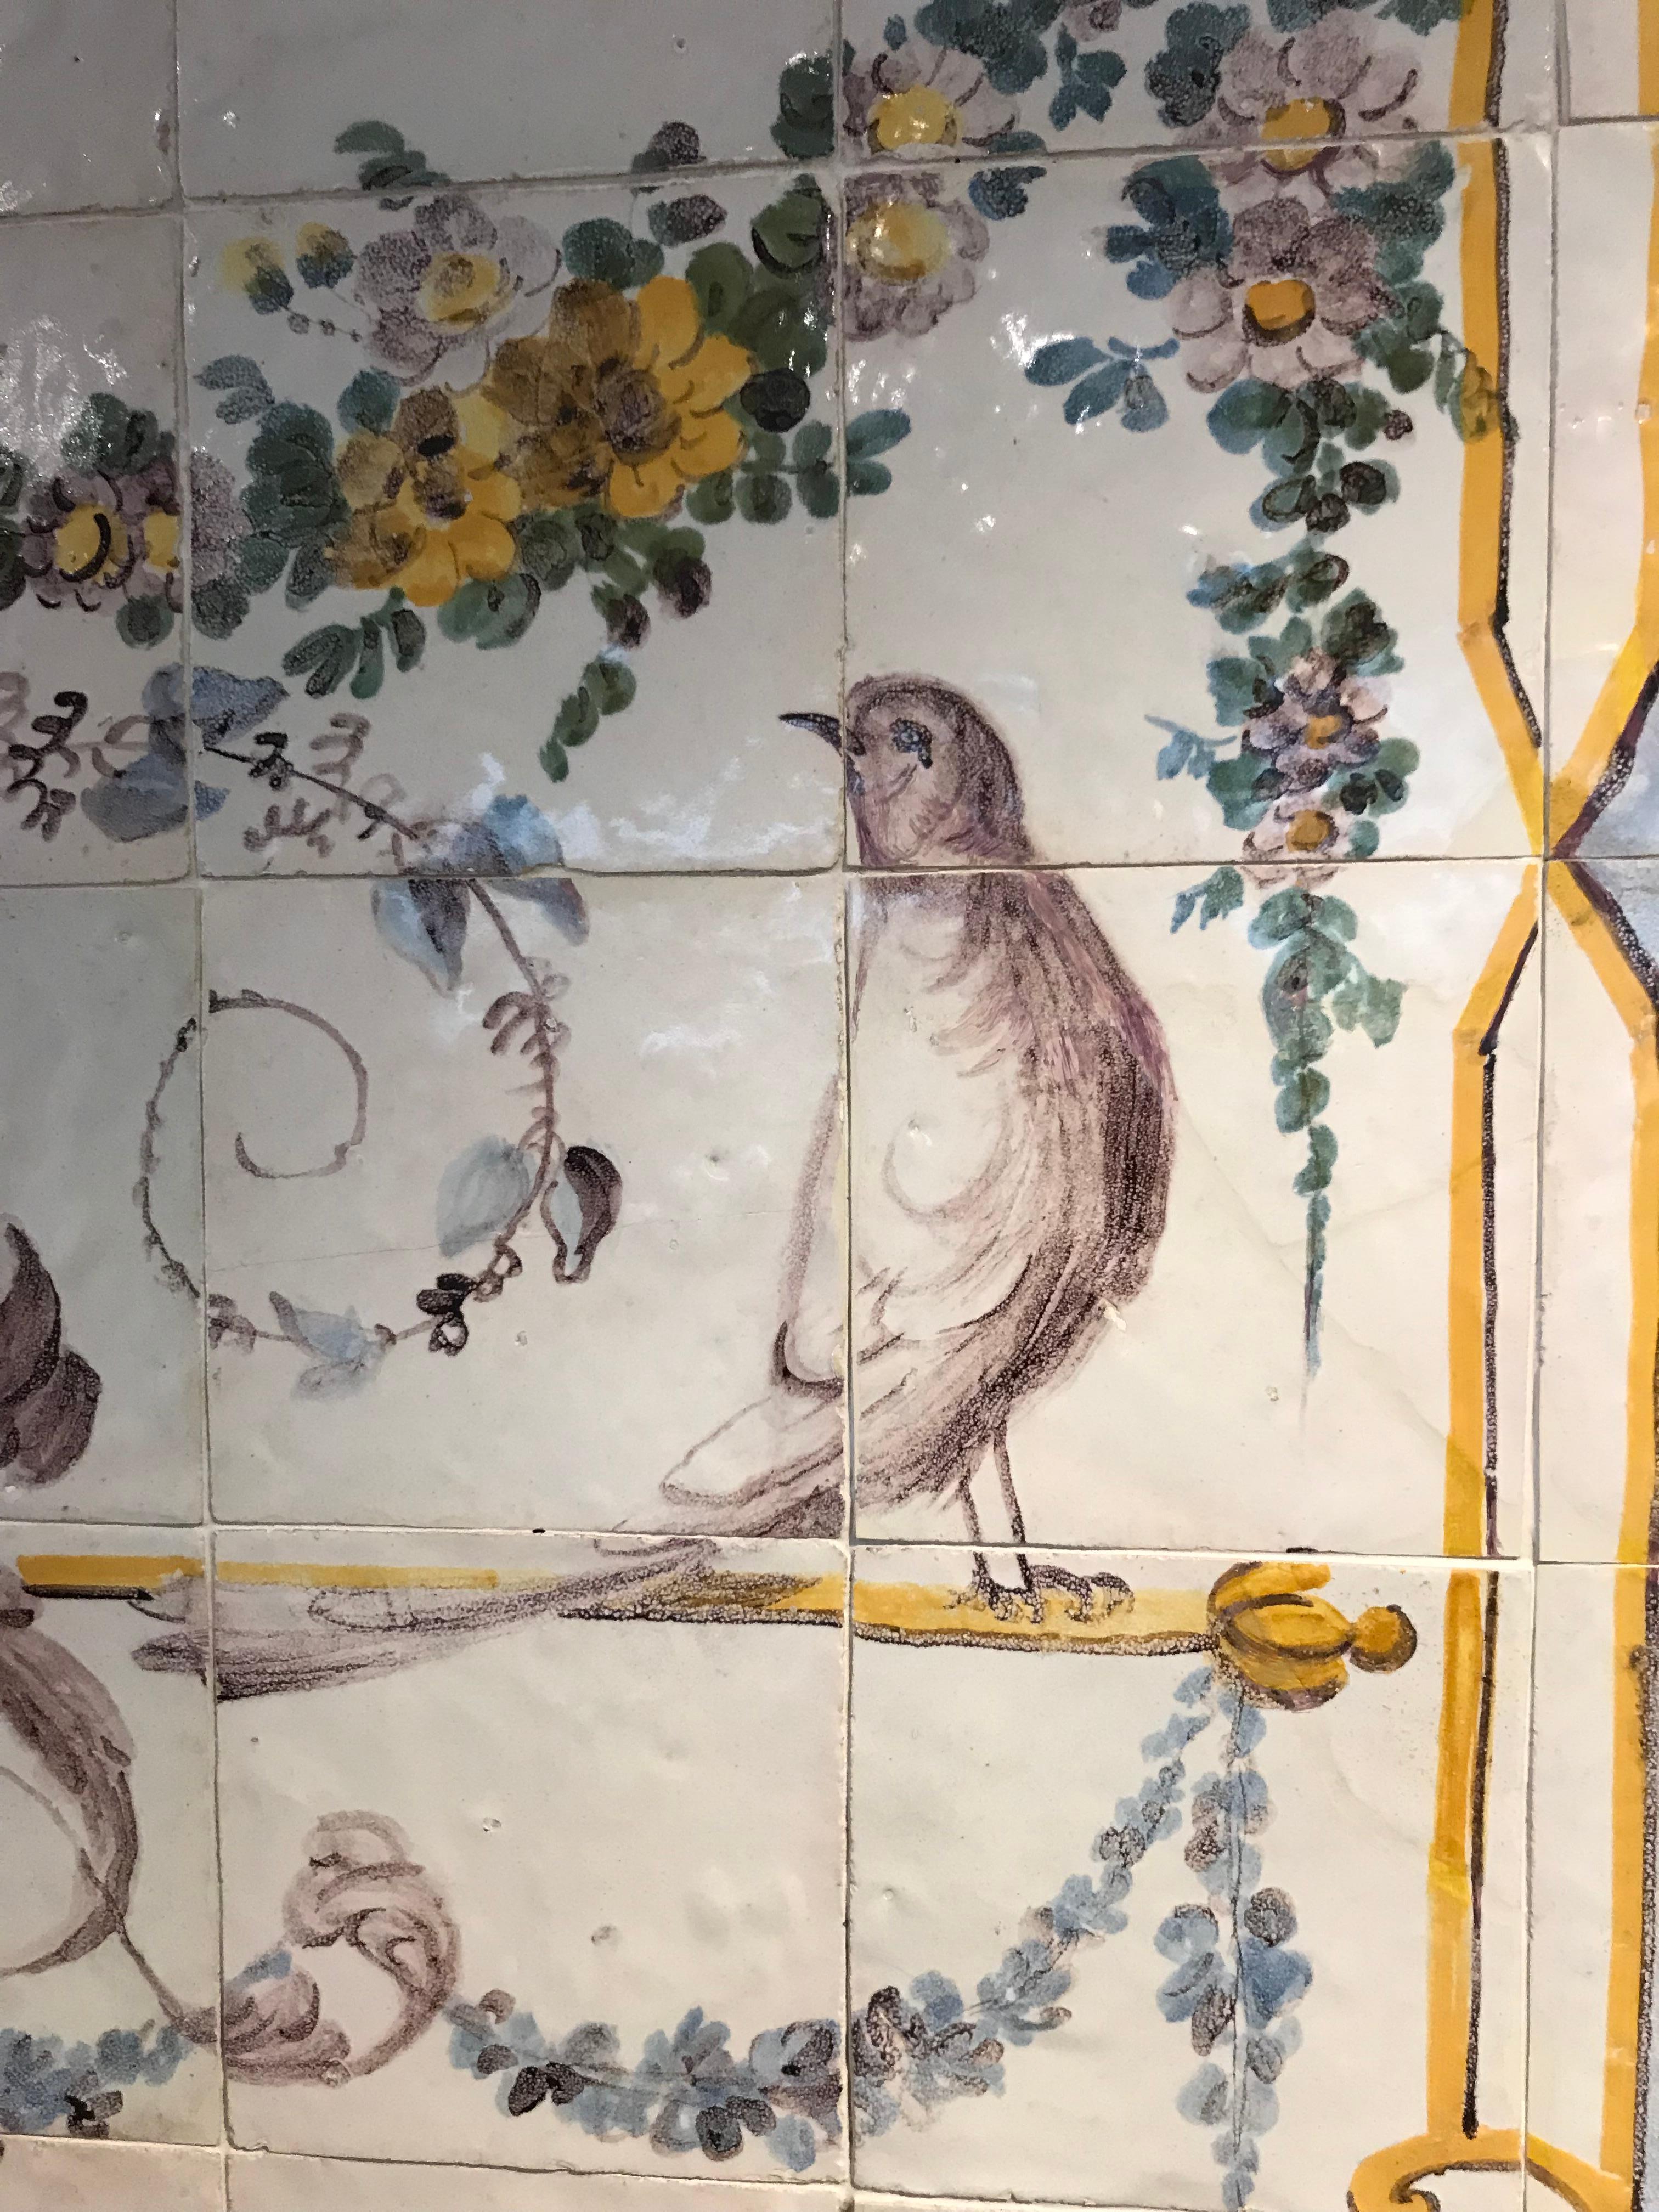 Panel of polychrome tiles of the period of D.Maria I, late eighteenth century. Represents a flowerpot and two birds in the neoclassical style of the time. The craftsmen have recovered the polychrome of the XVII and dropped the blue on white very